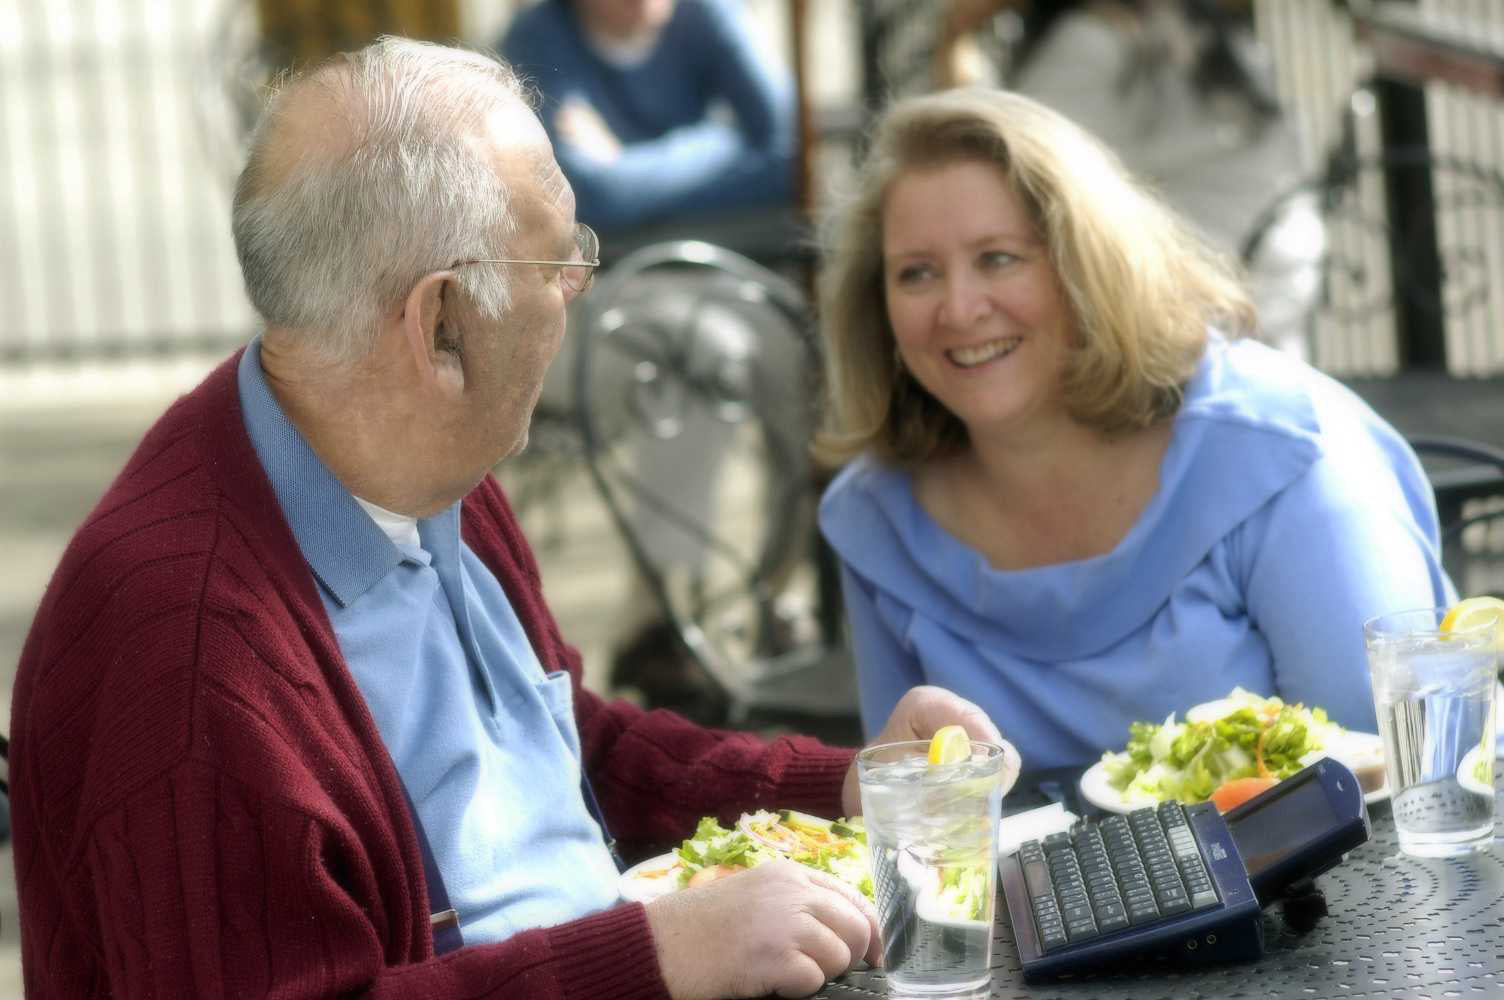 Woman and Man with communication device having lunch